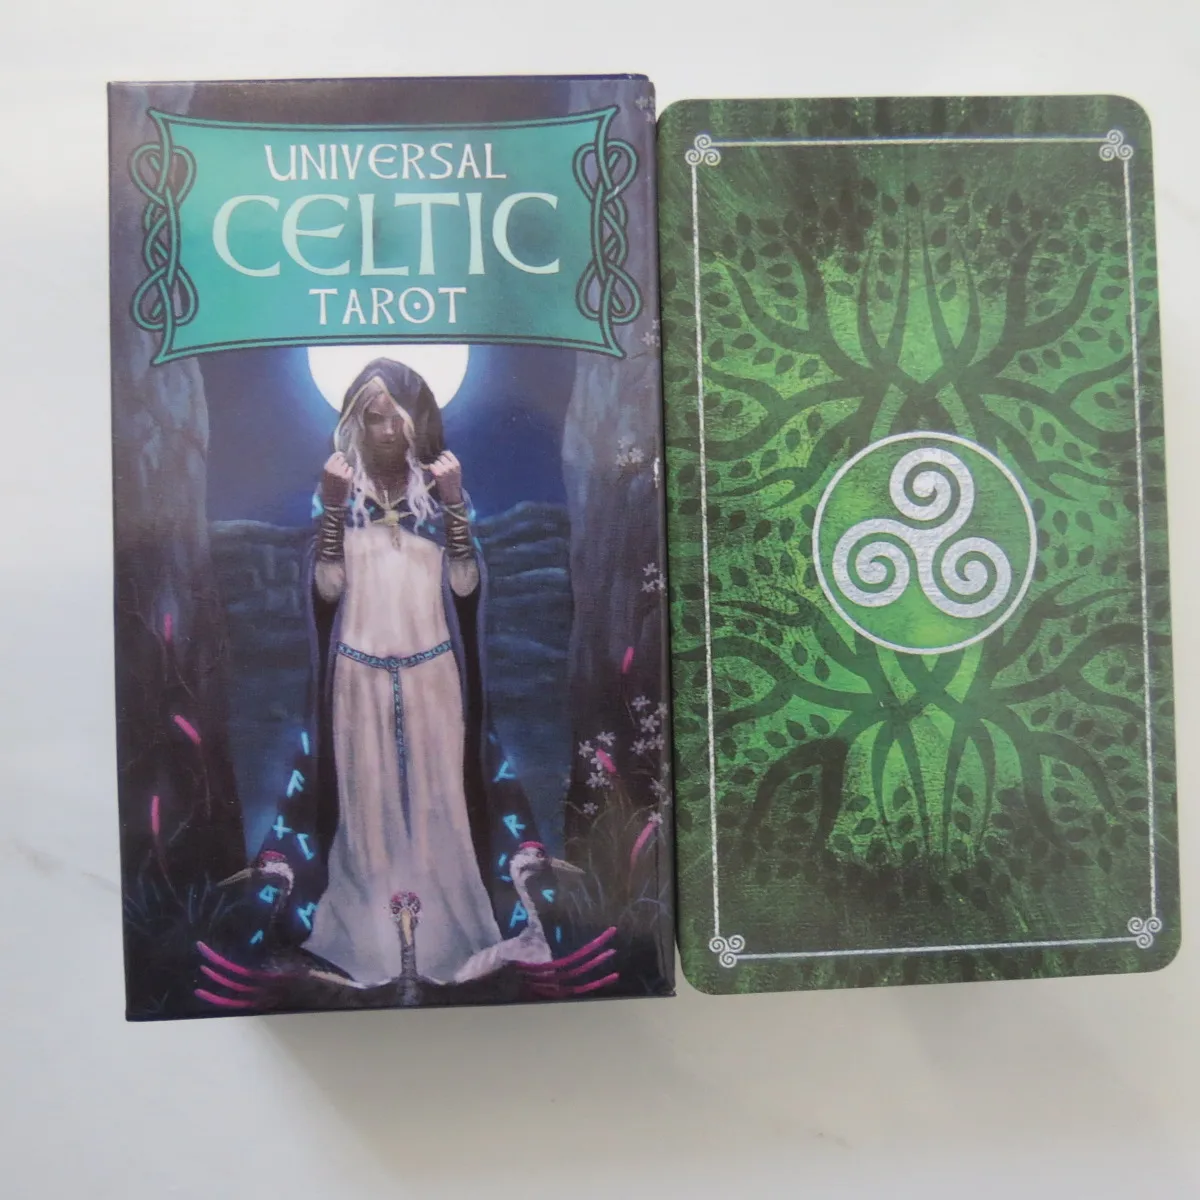 new Tarot deck oracles cards mysterious divination Universal Celtic tarot cards for women girls cards game board game